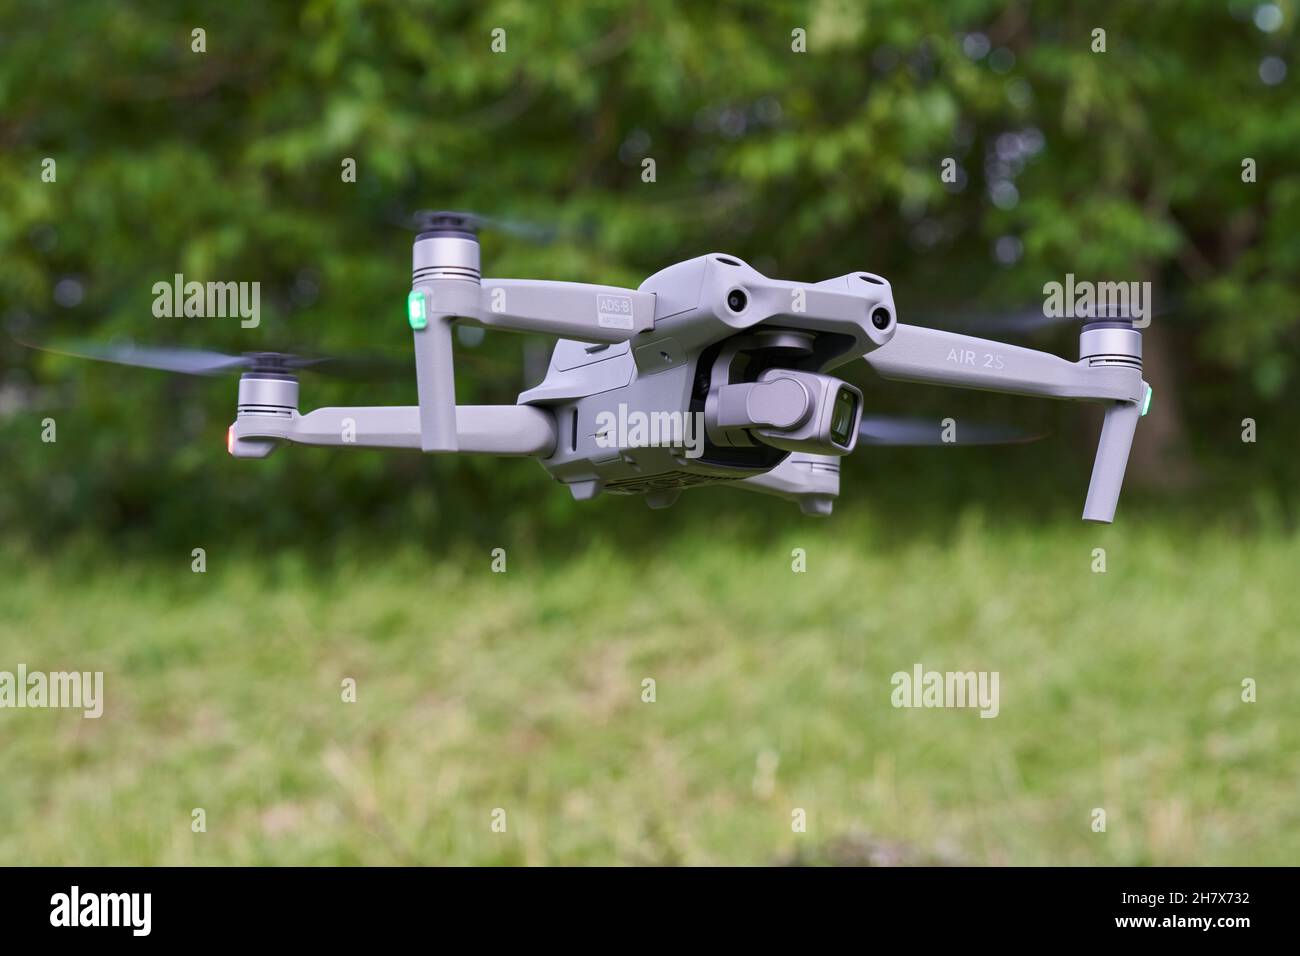 Nürtingen, Germany - June 26, 2021: Gray Dji air 2s drone hovers over the green meadow. Tree in the background. Stock Photo